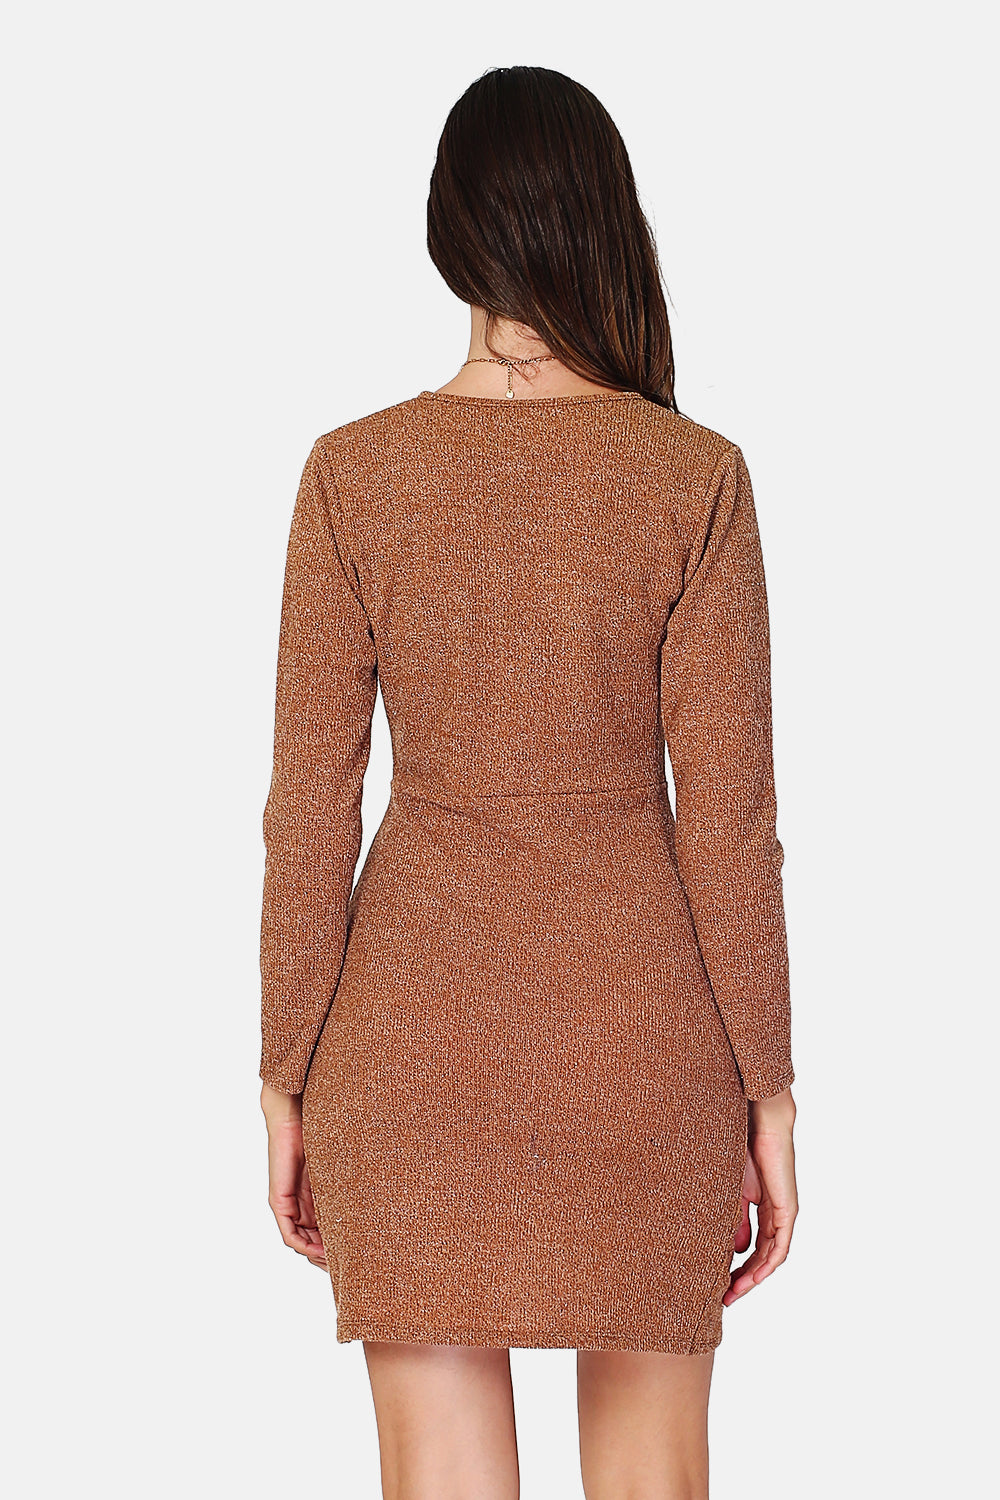 V-neck crossover dress with long sleeves